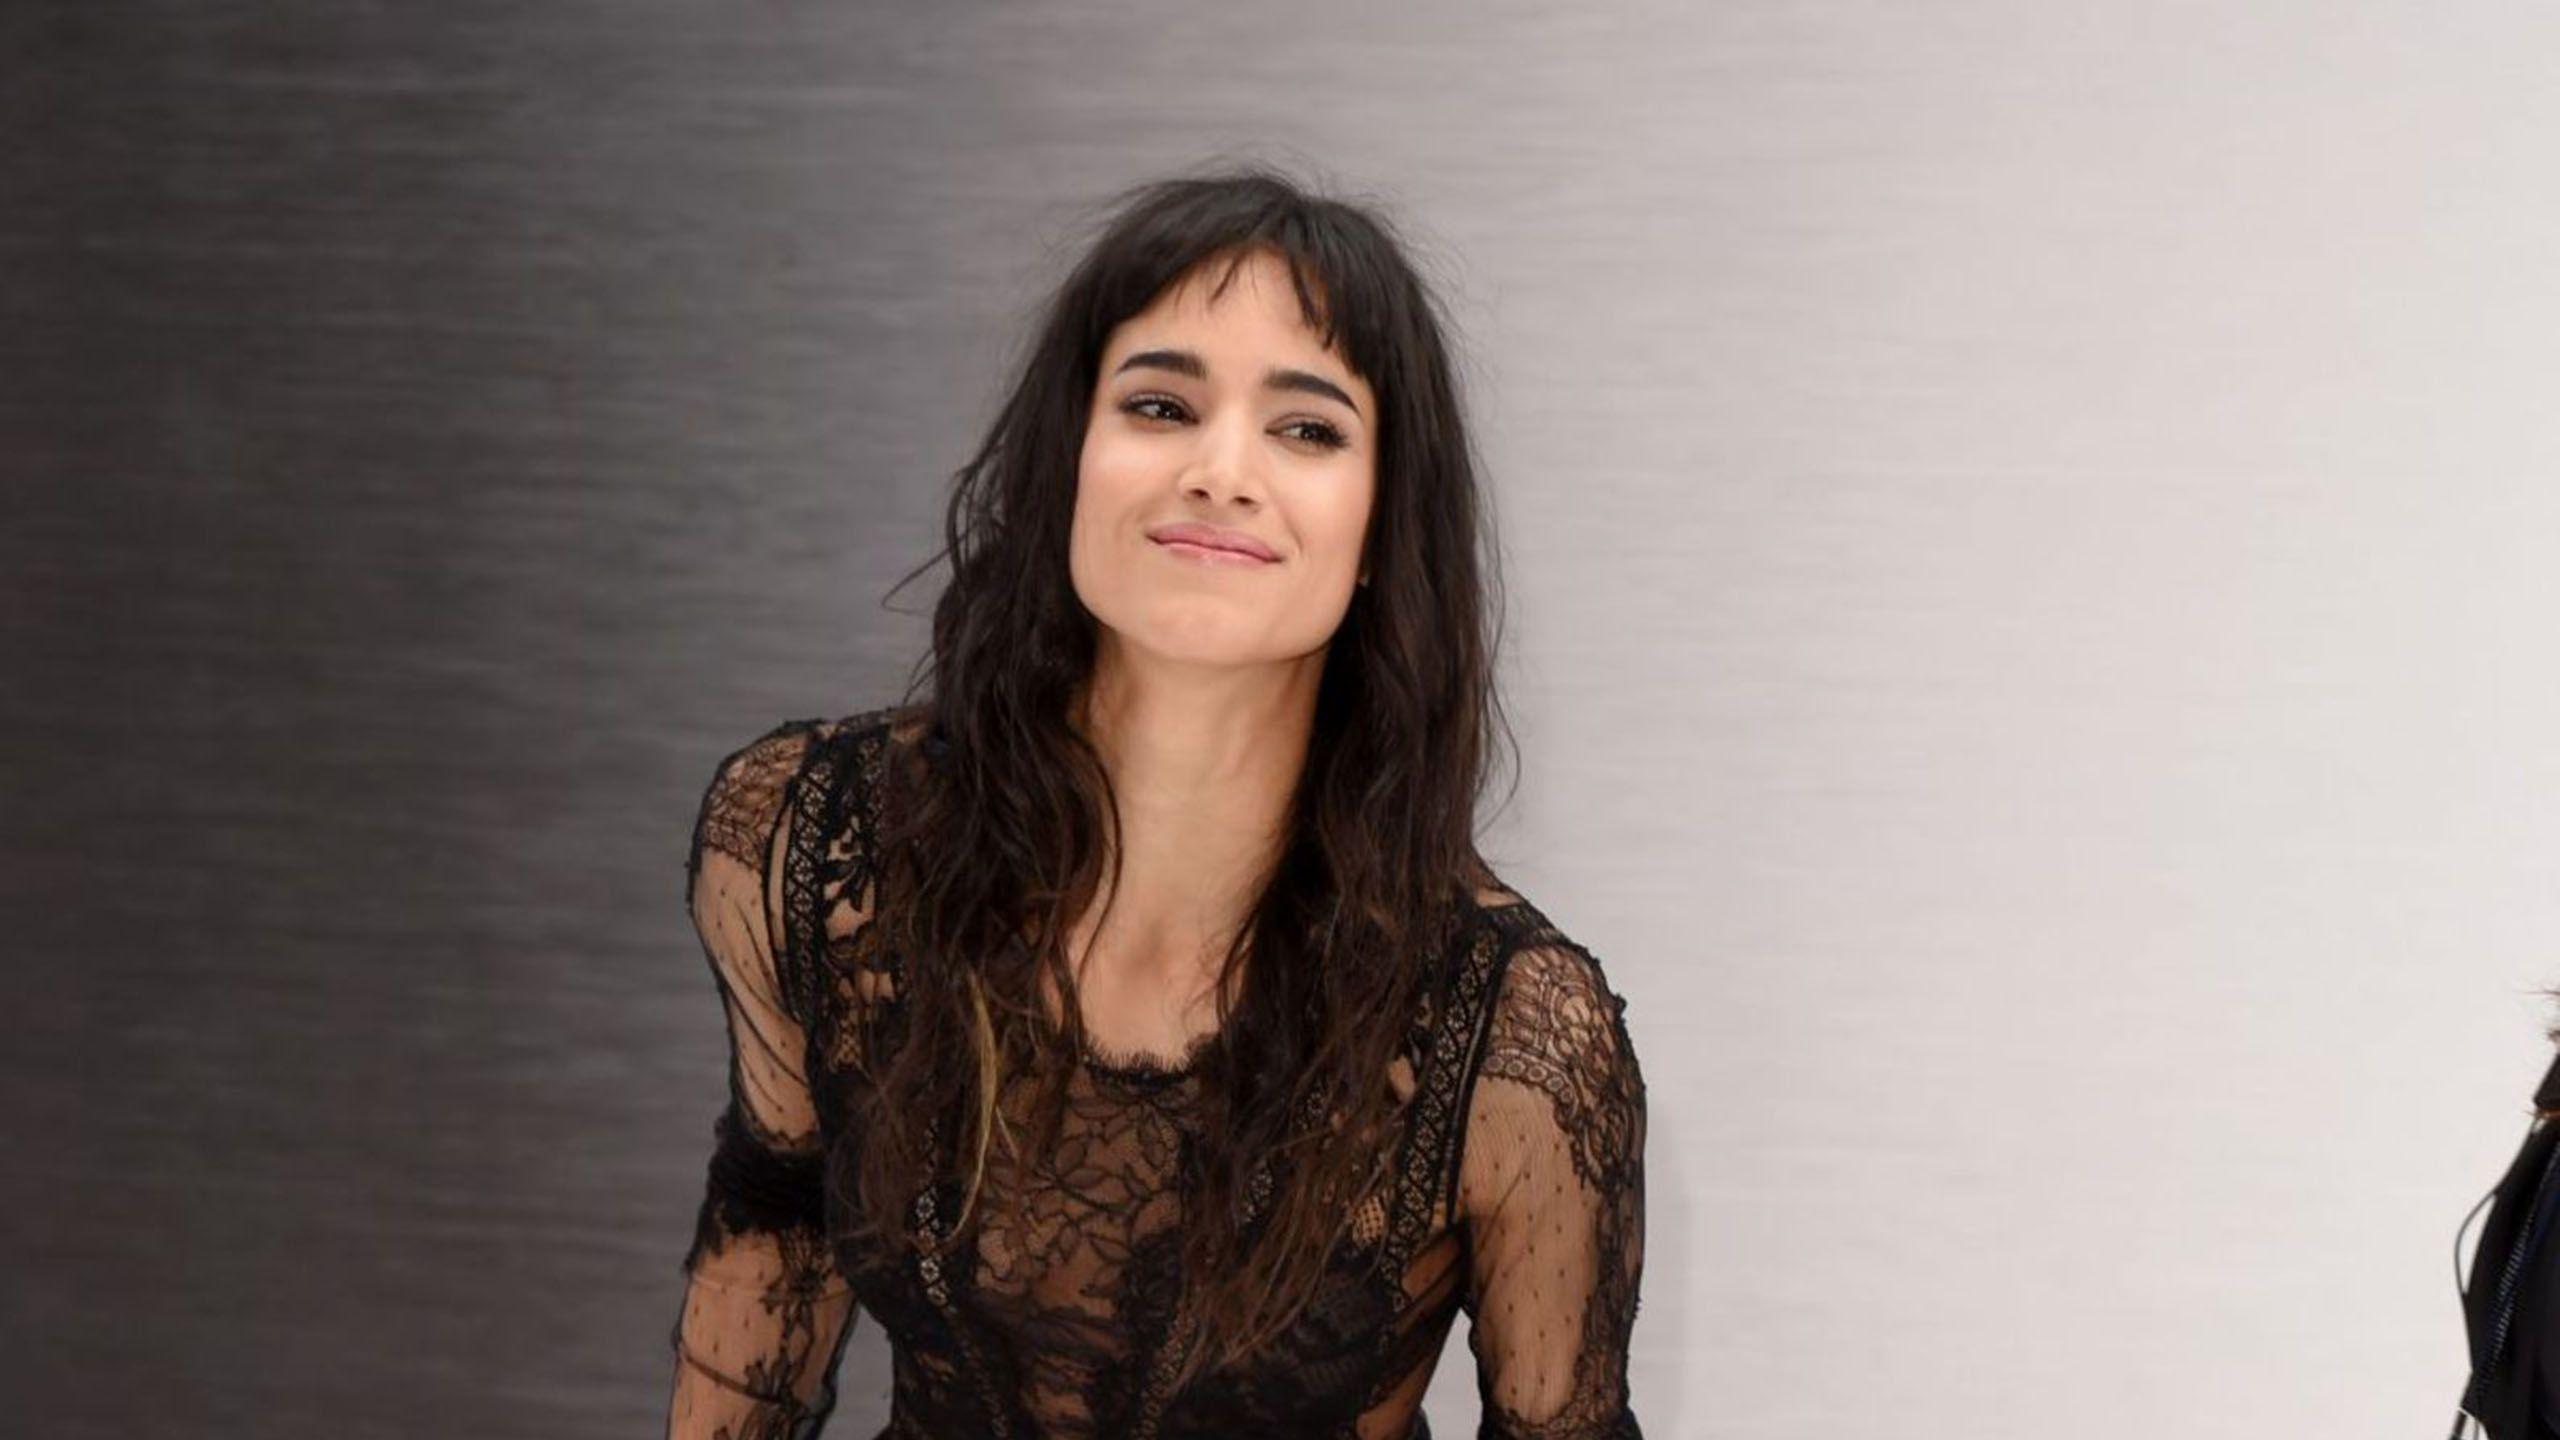 HD wallpaper sofia boutella 4k picture image portrait beauty looking at  camera  Wallpaper Flare